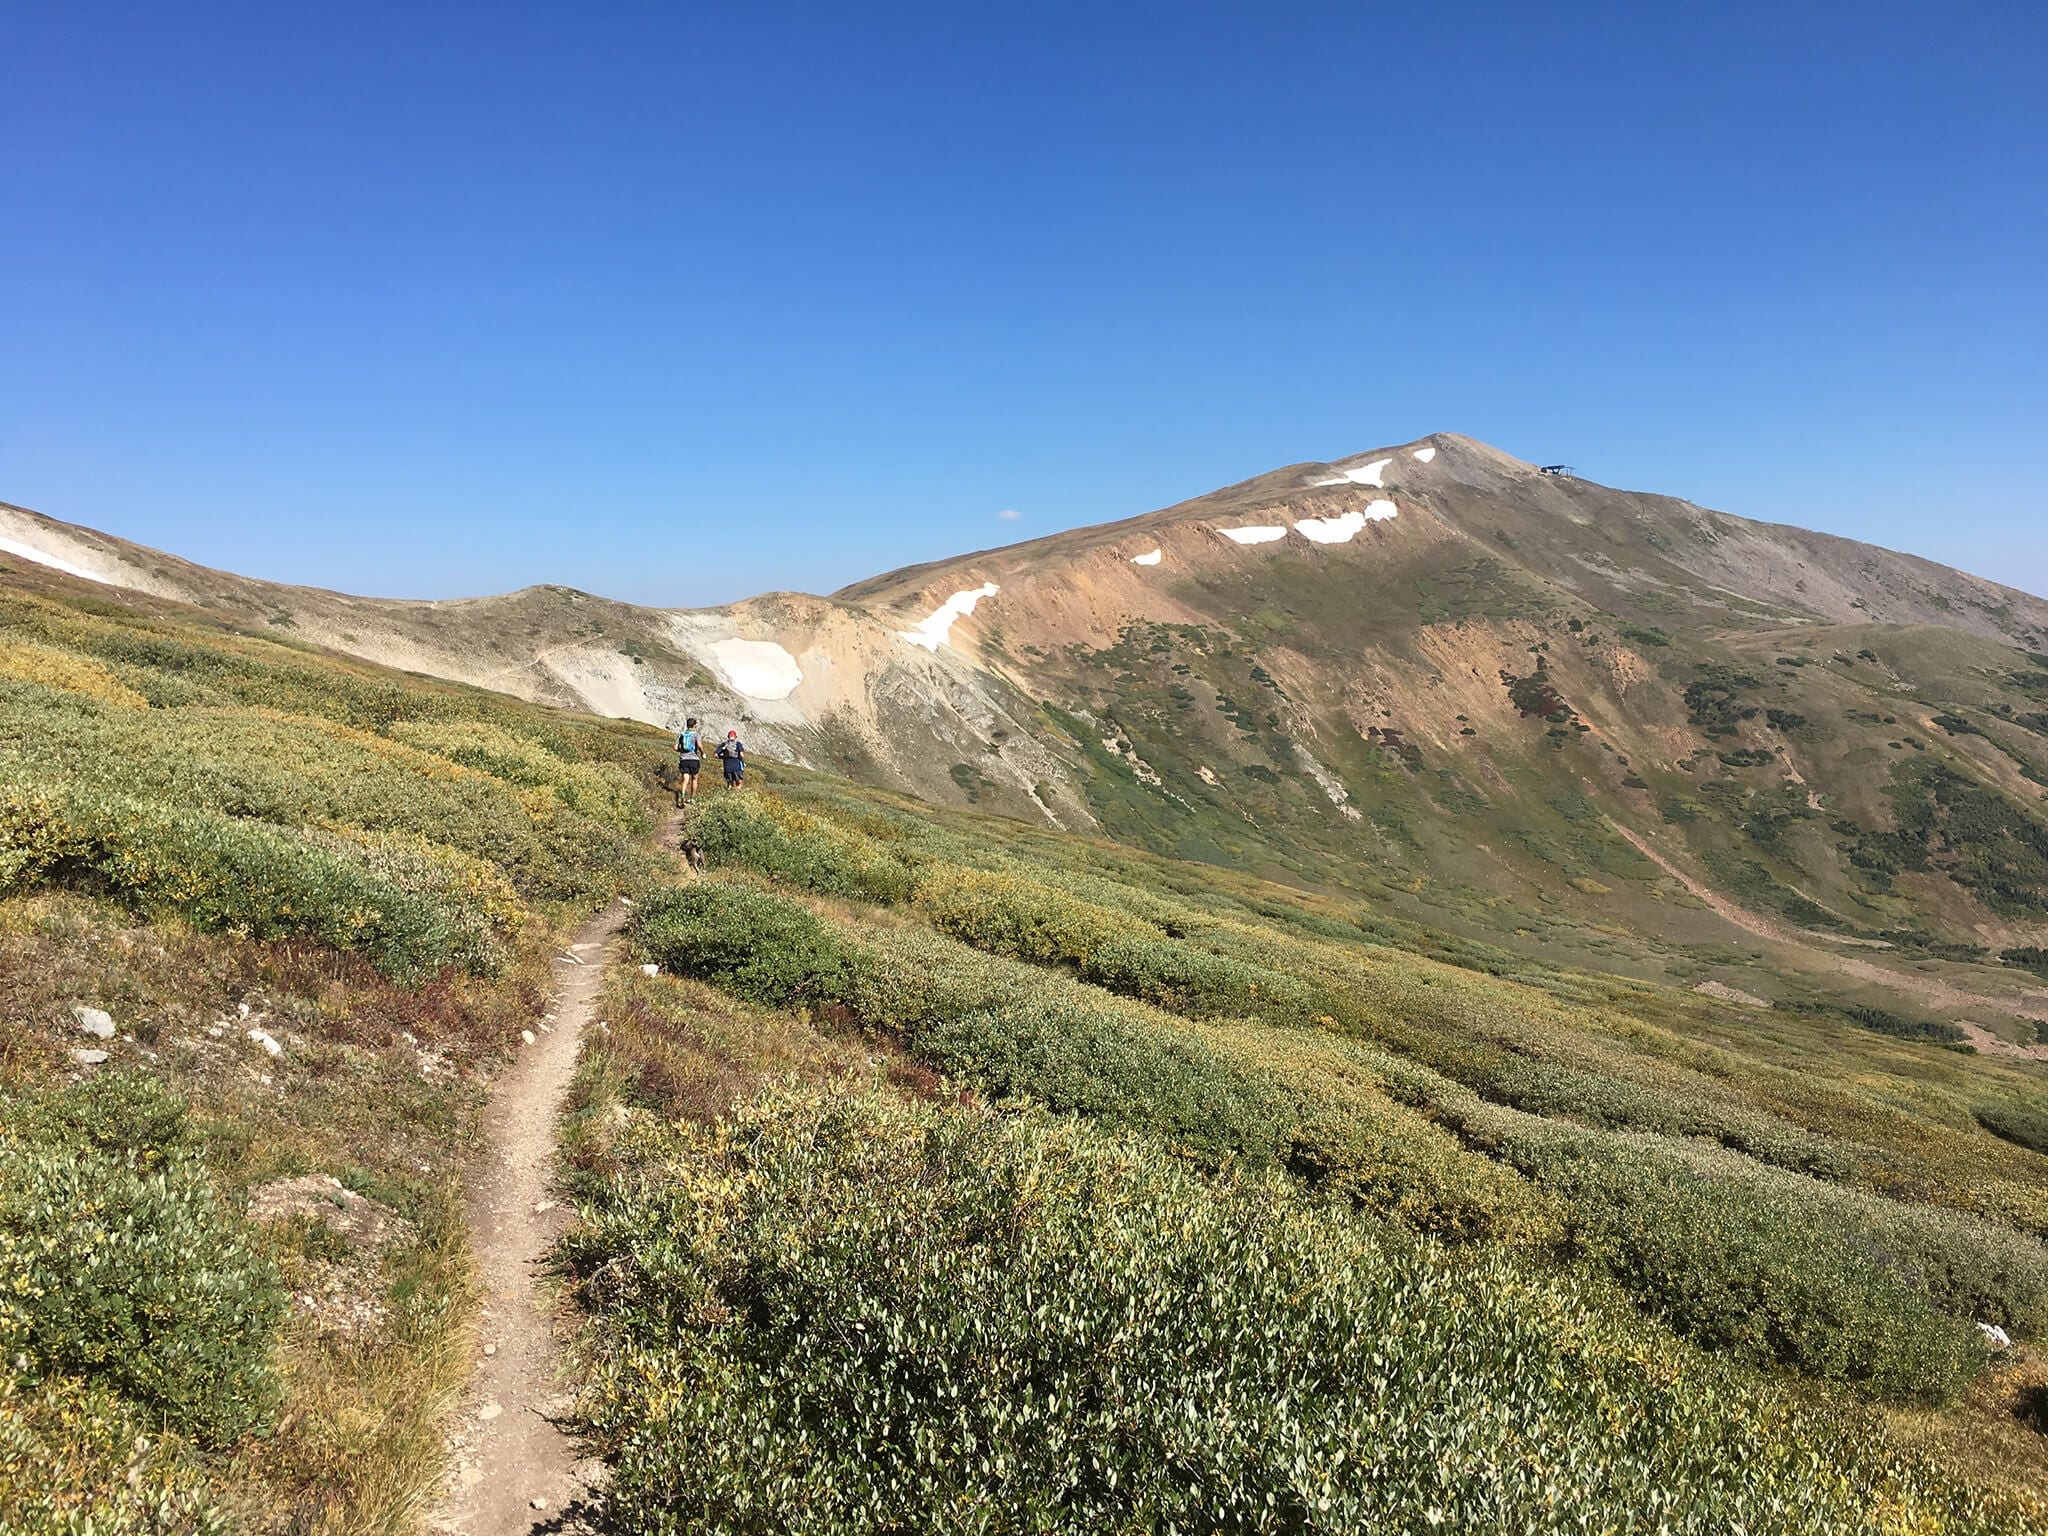 The ascent up Peak 8 in the summertime in Breckenridge